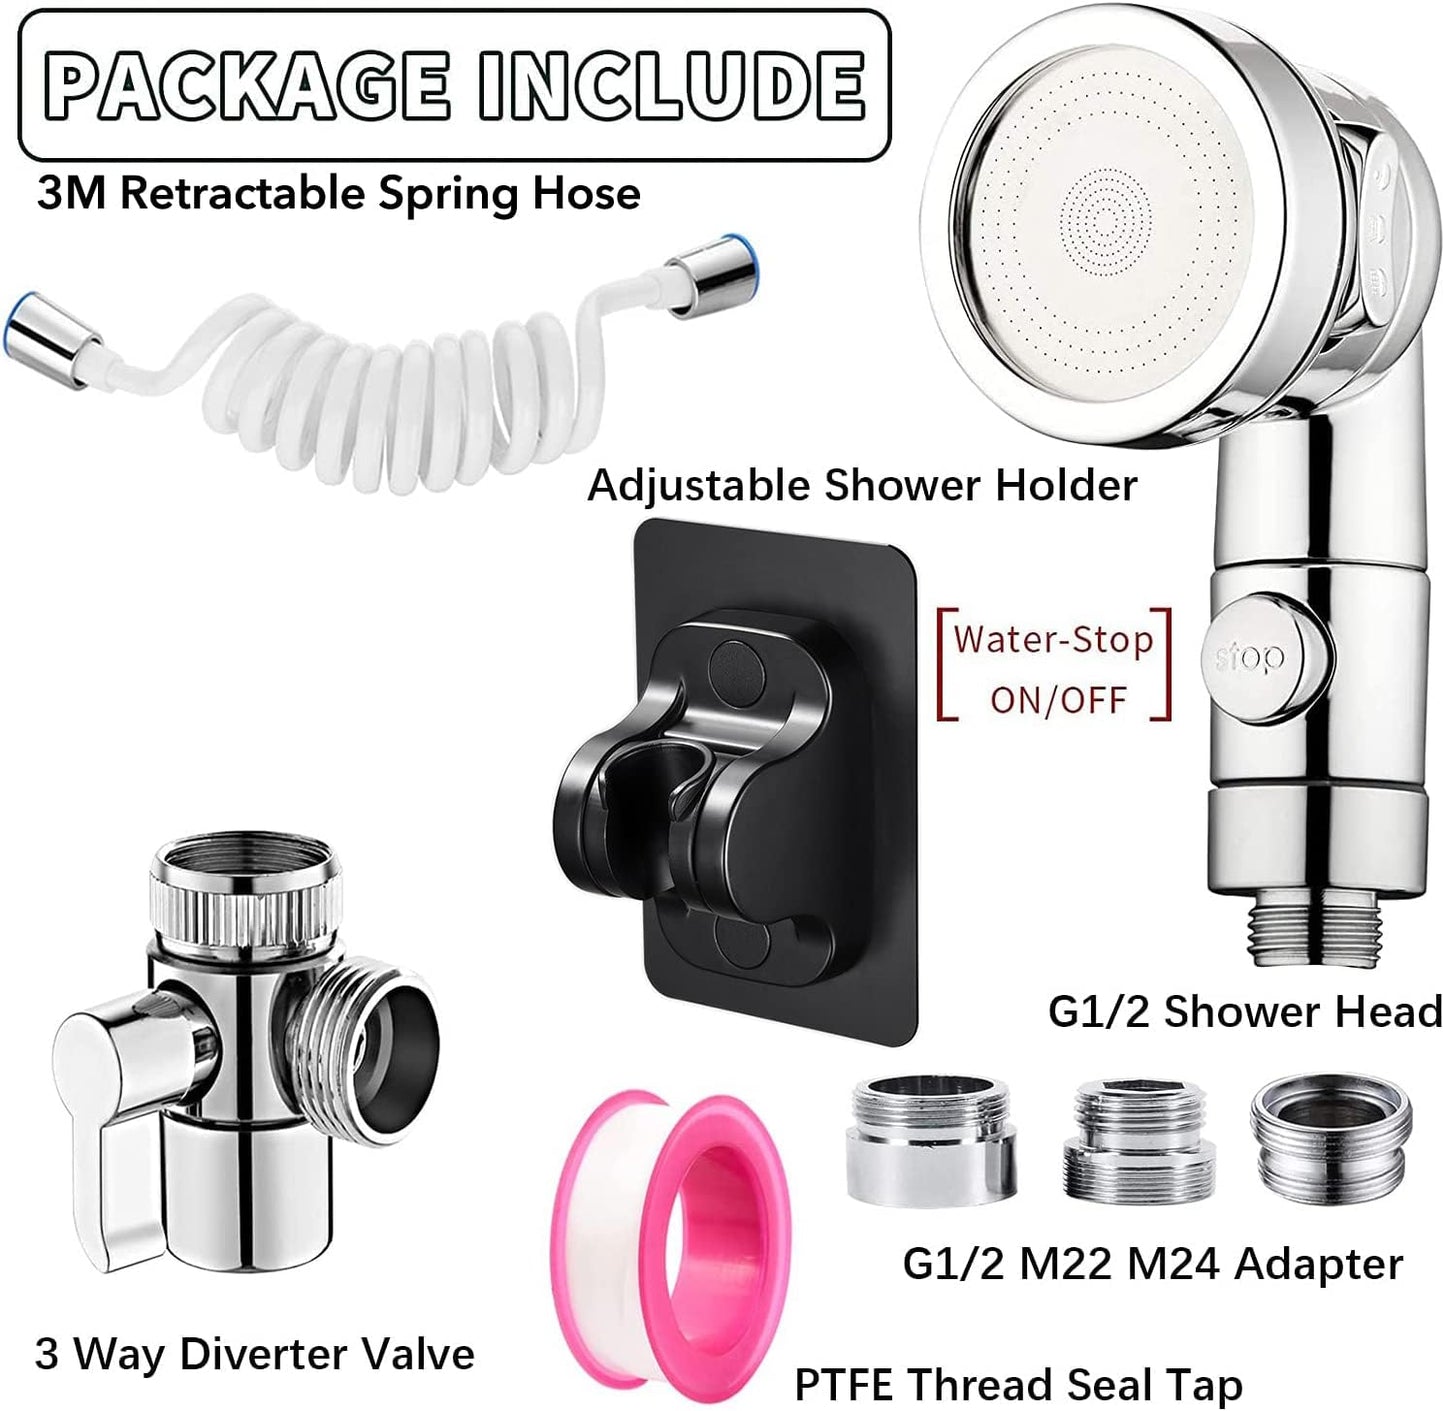 Versatile Sink Handheld Shower Kit with a 9.8ft (2.9m) Telescopic Hose